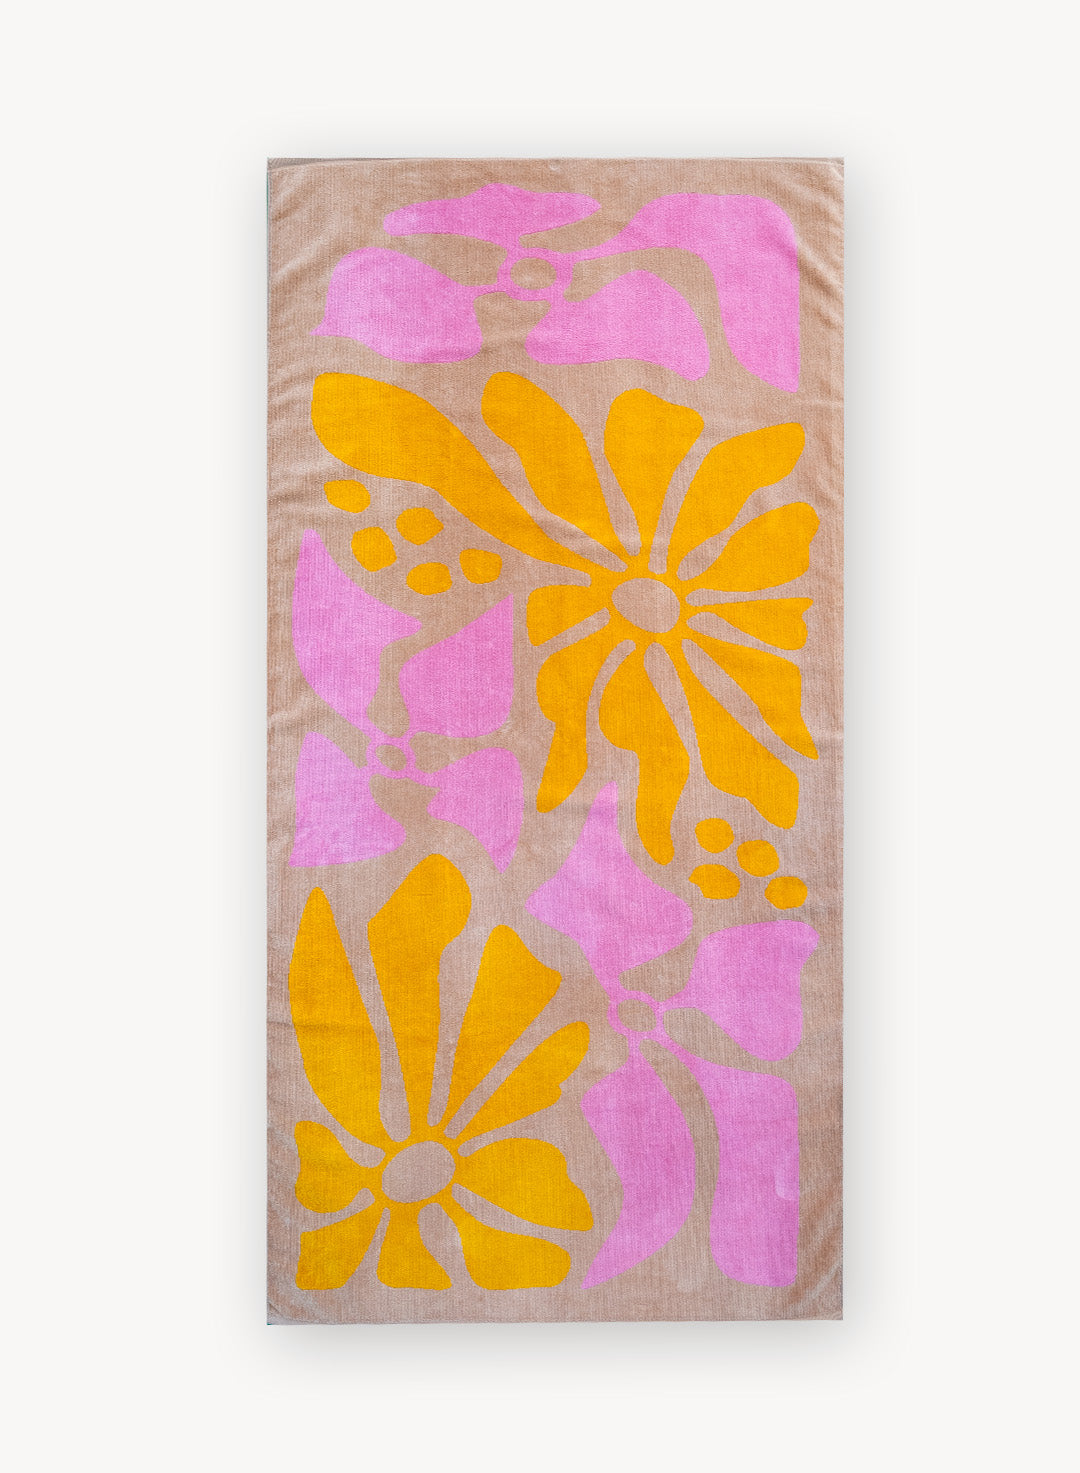 Abstract artwork of flowers Helianthus annuus and Clarkia unguiculata. Designed by Lesley Goren. Background color is tan with yellow sunflowers and pink clarkias.